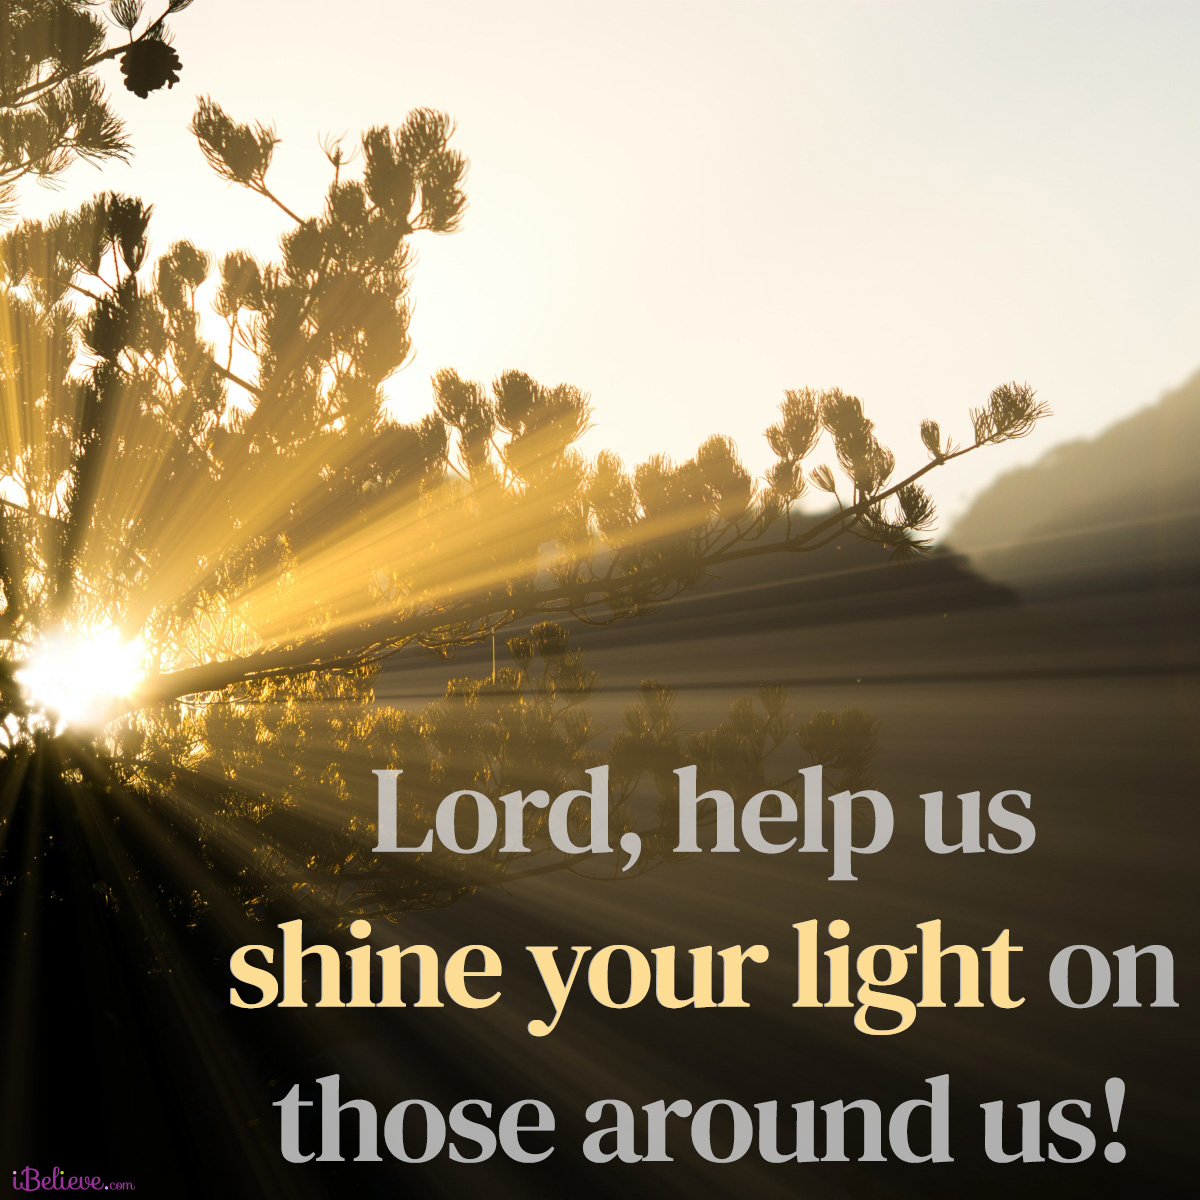 Lord help us shine your light, inspirational photo